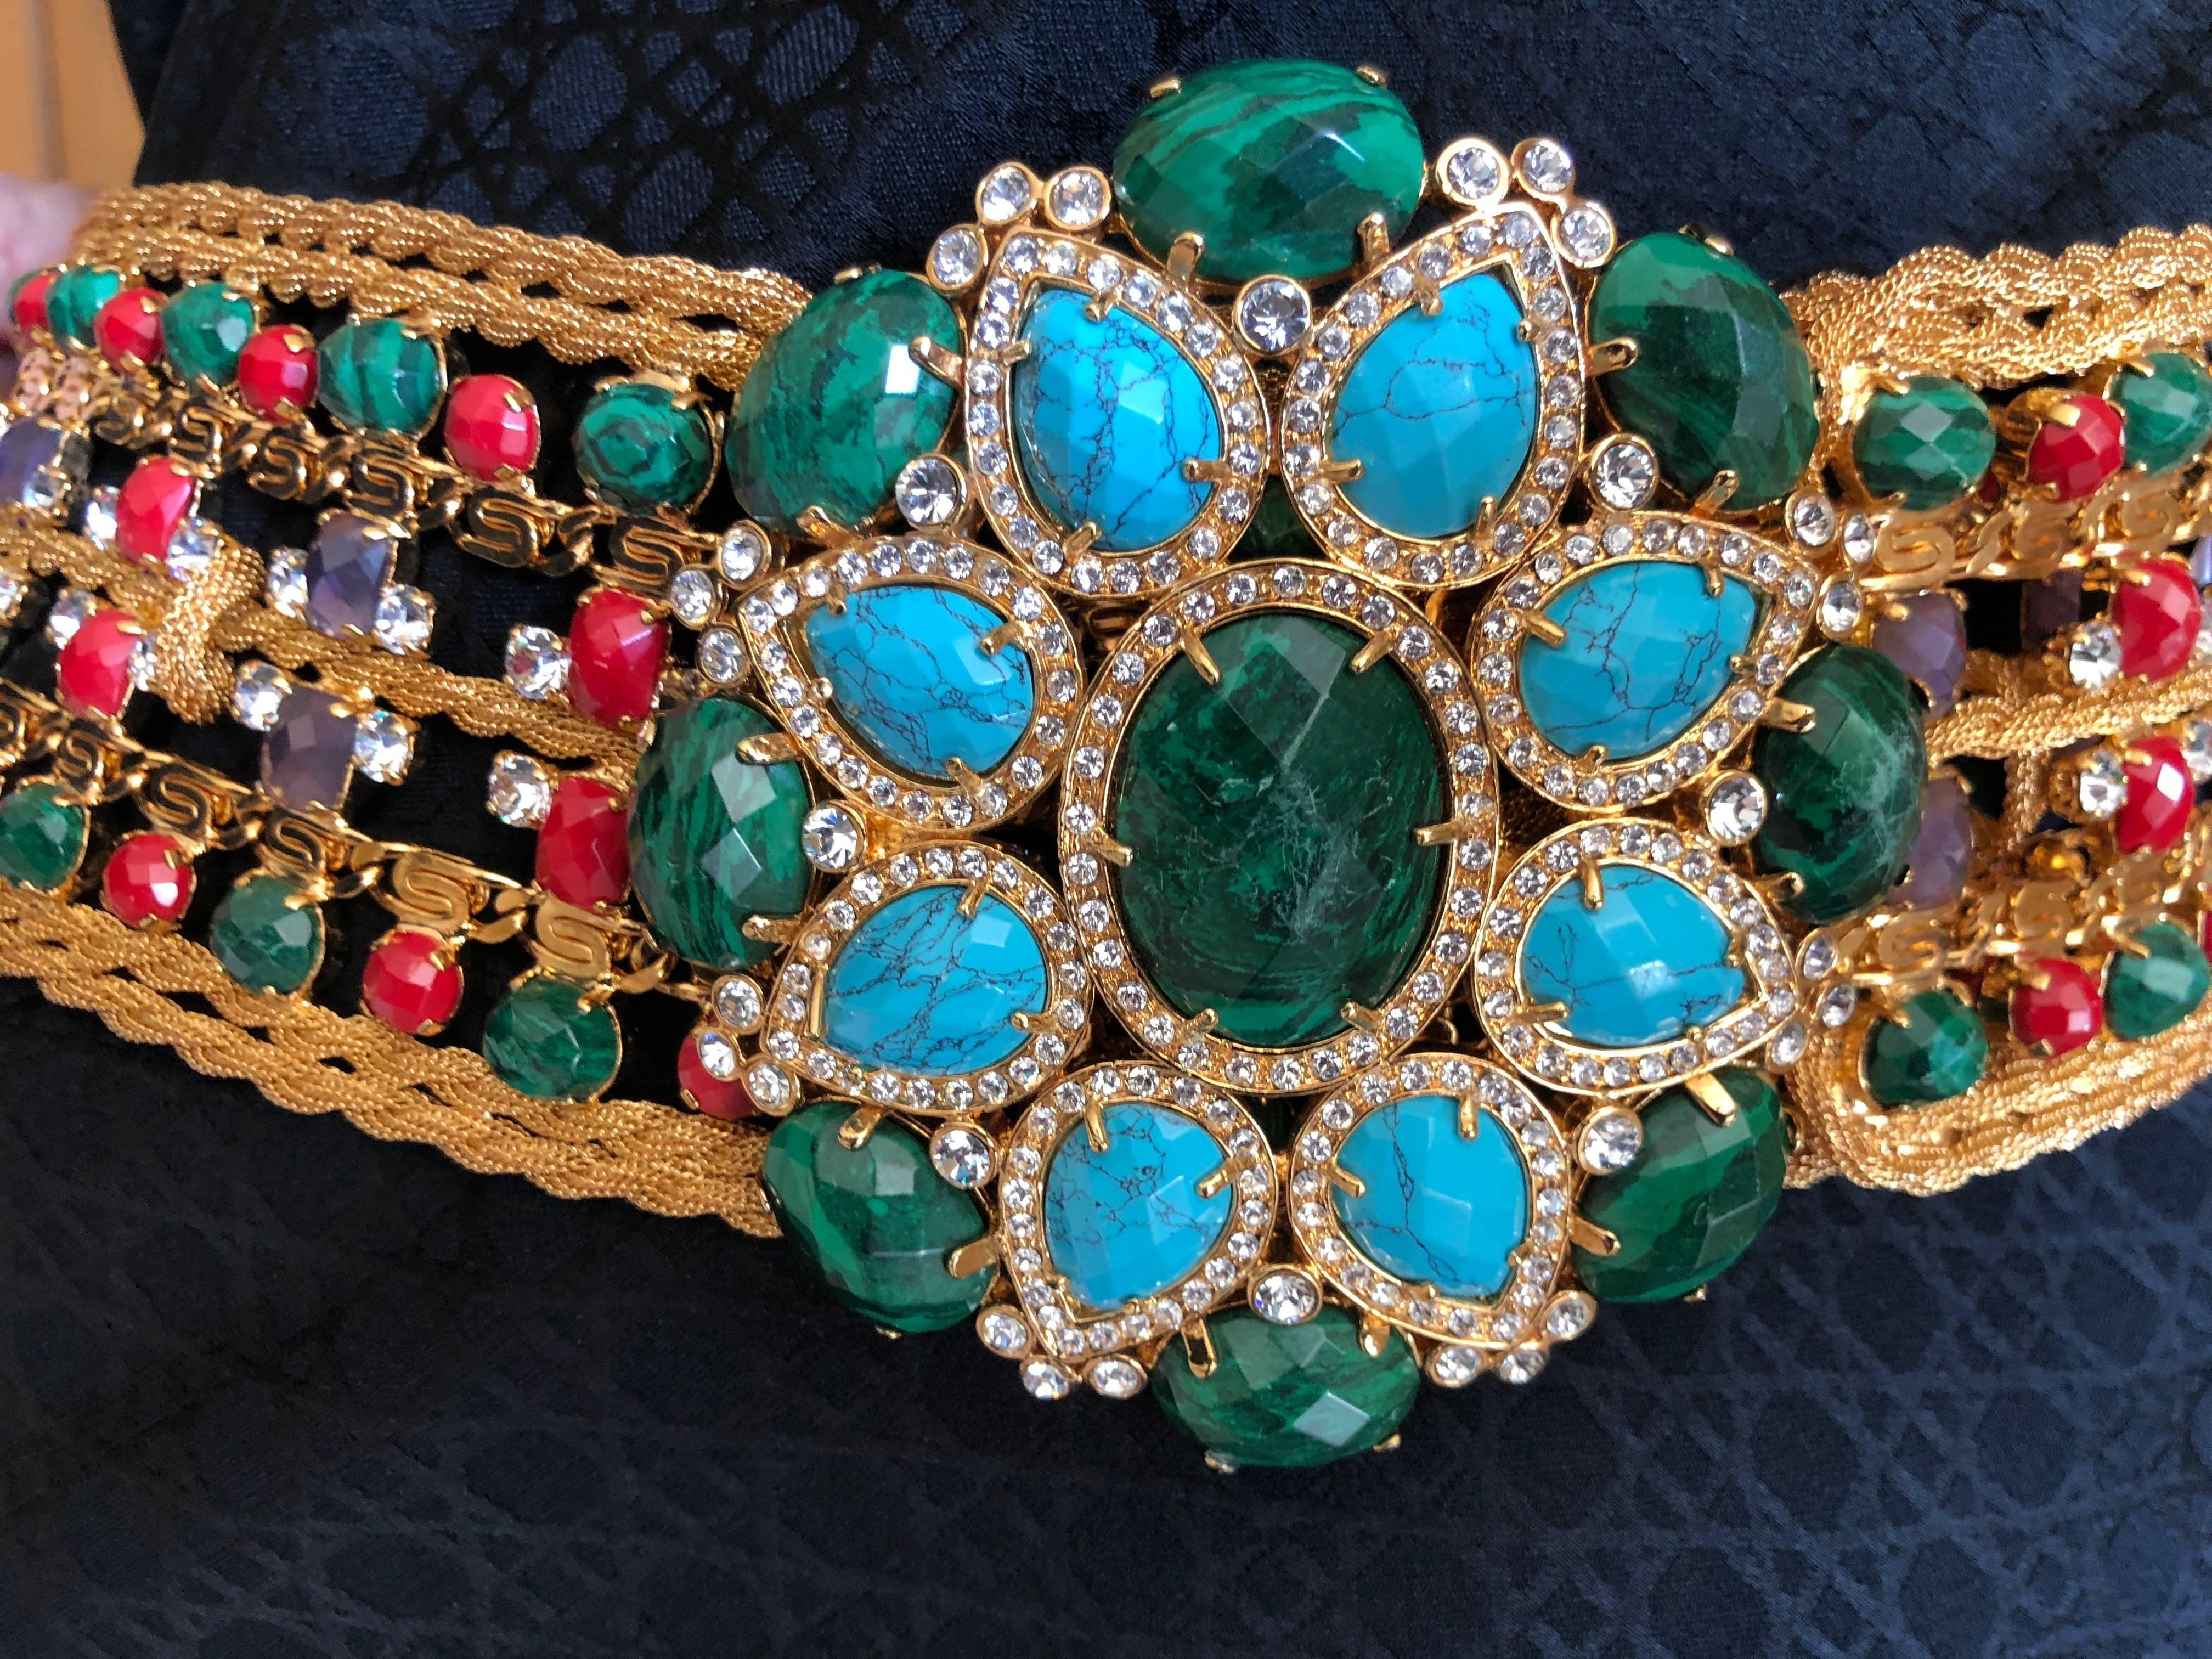 Roberto Cavalli Gobsmacking Faux Turquoise & Emerald Wide Maharaja Belt 
Inspired by the Maharaja's of India, these belts are rare, and getting harder to find.
This is a sensational piece. 
The belt is 3